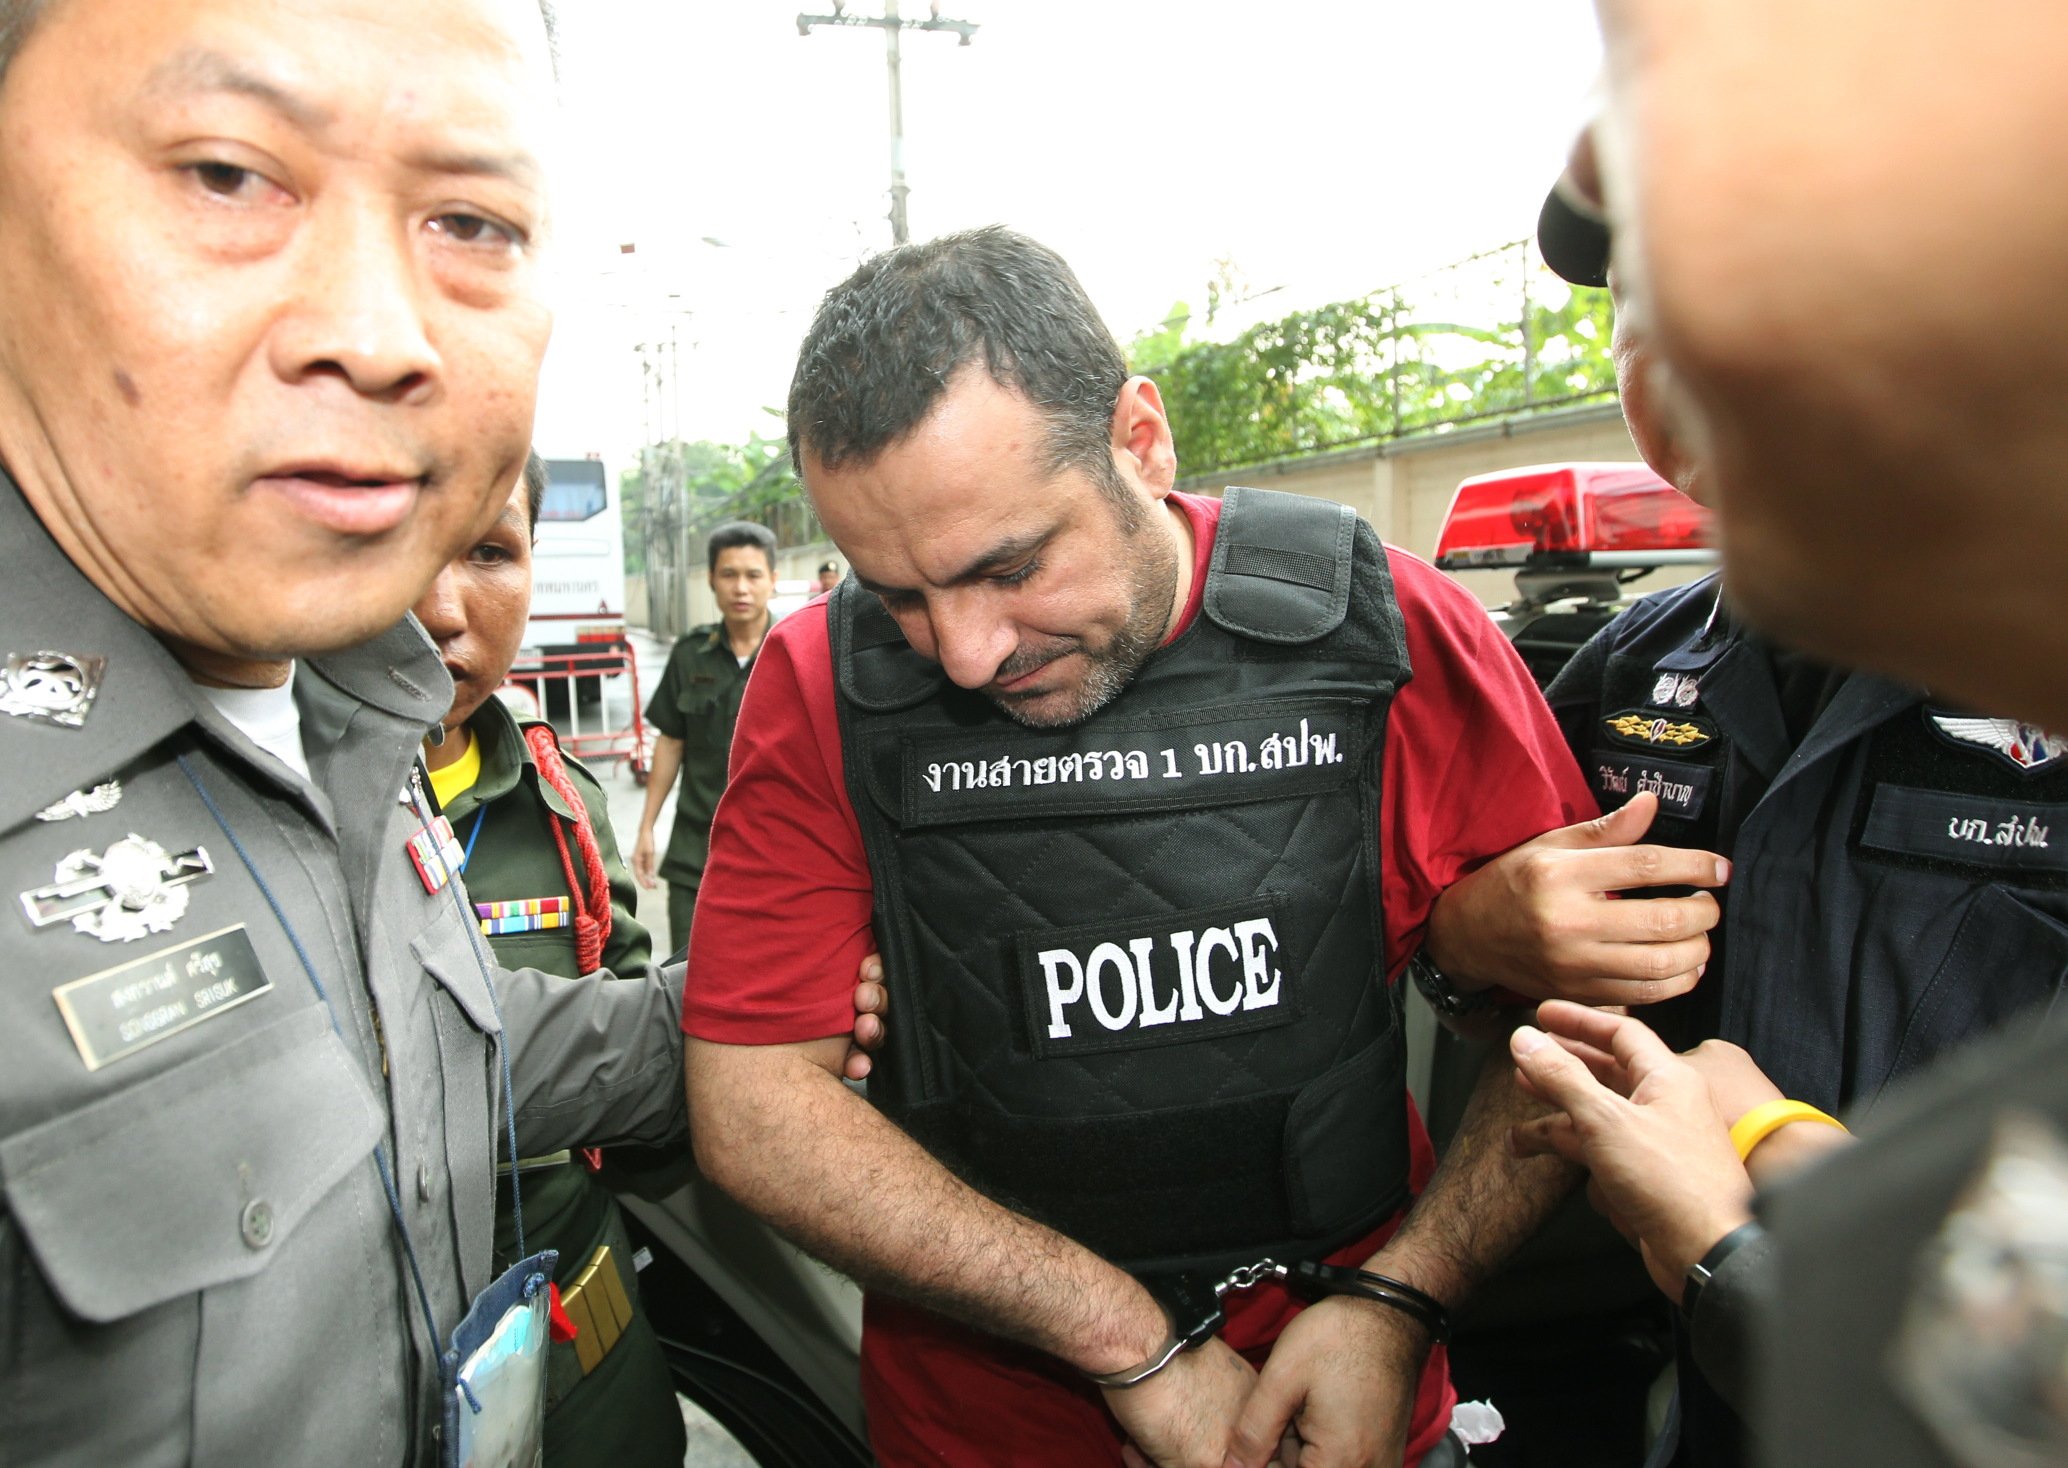 Swedish-Lebanese man Attis Hussein (C) is escorted by Thai police officers as he arrives at the criminal court in Bangkok, Thailand. Photo: EPA